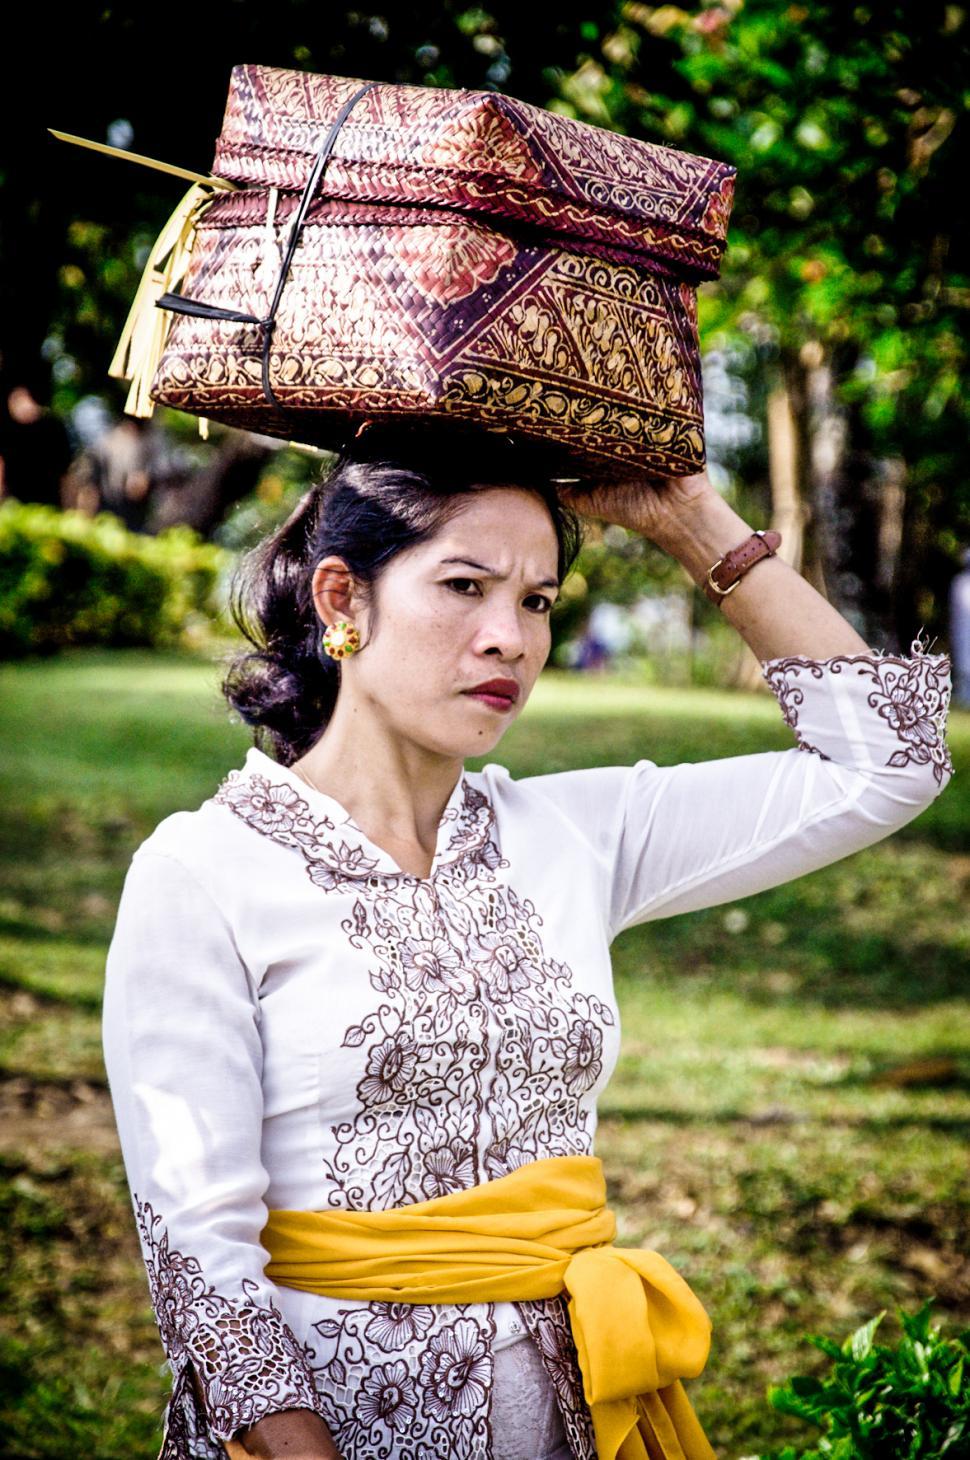 Free Image of Portrait of a balinese woman with a basket 